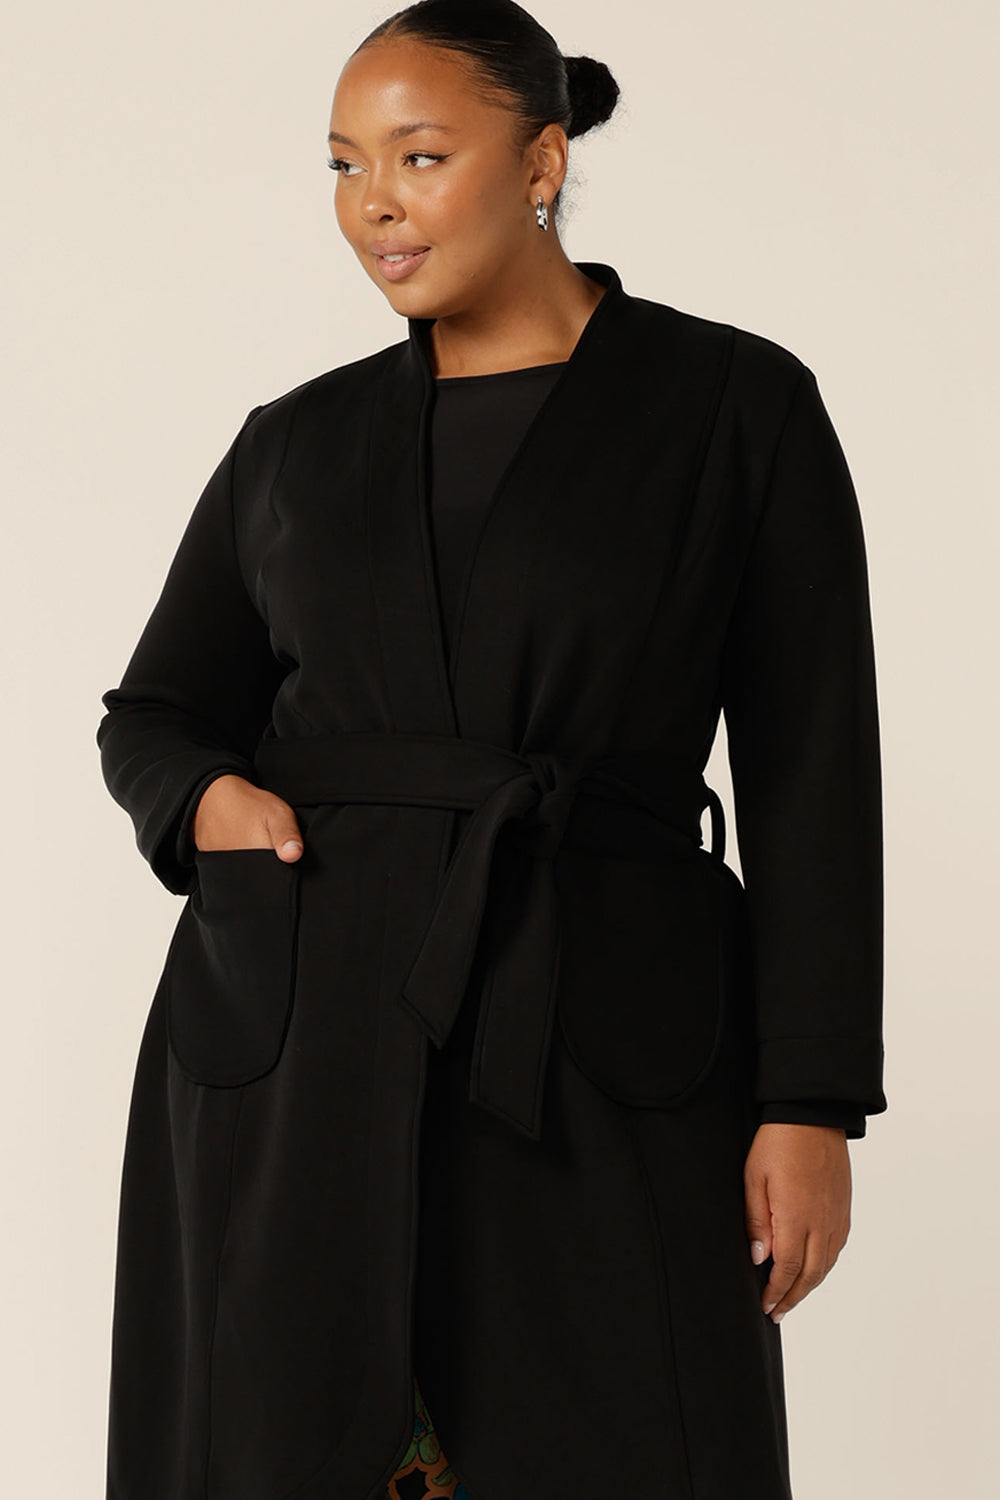 Great for chic city style, this black coat layers well for winter commuter workwear and as a travel coat. A curvy size 18 woman wears this softly tailored black trenchcoat in modal fabric tied at the waist.